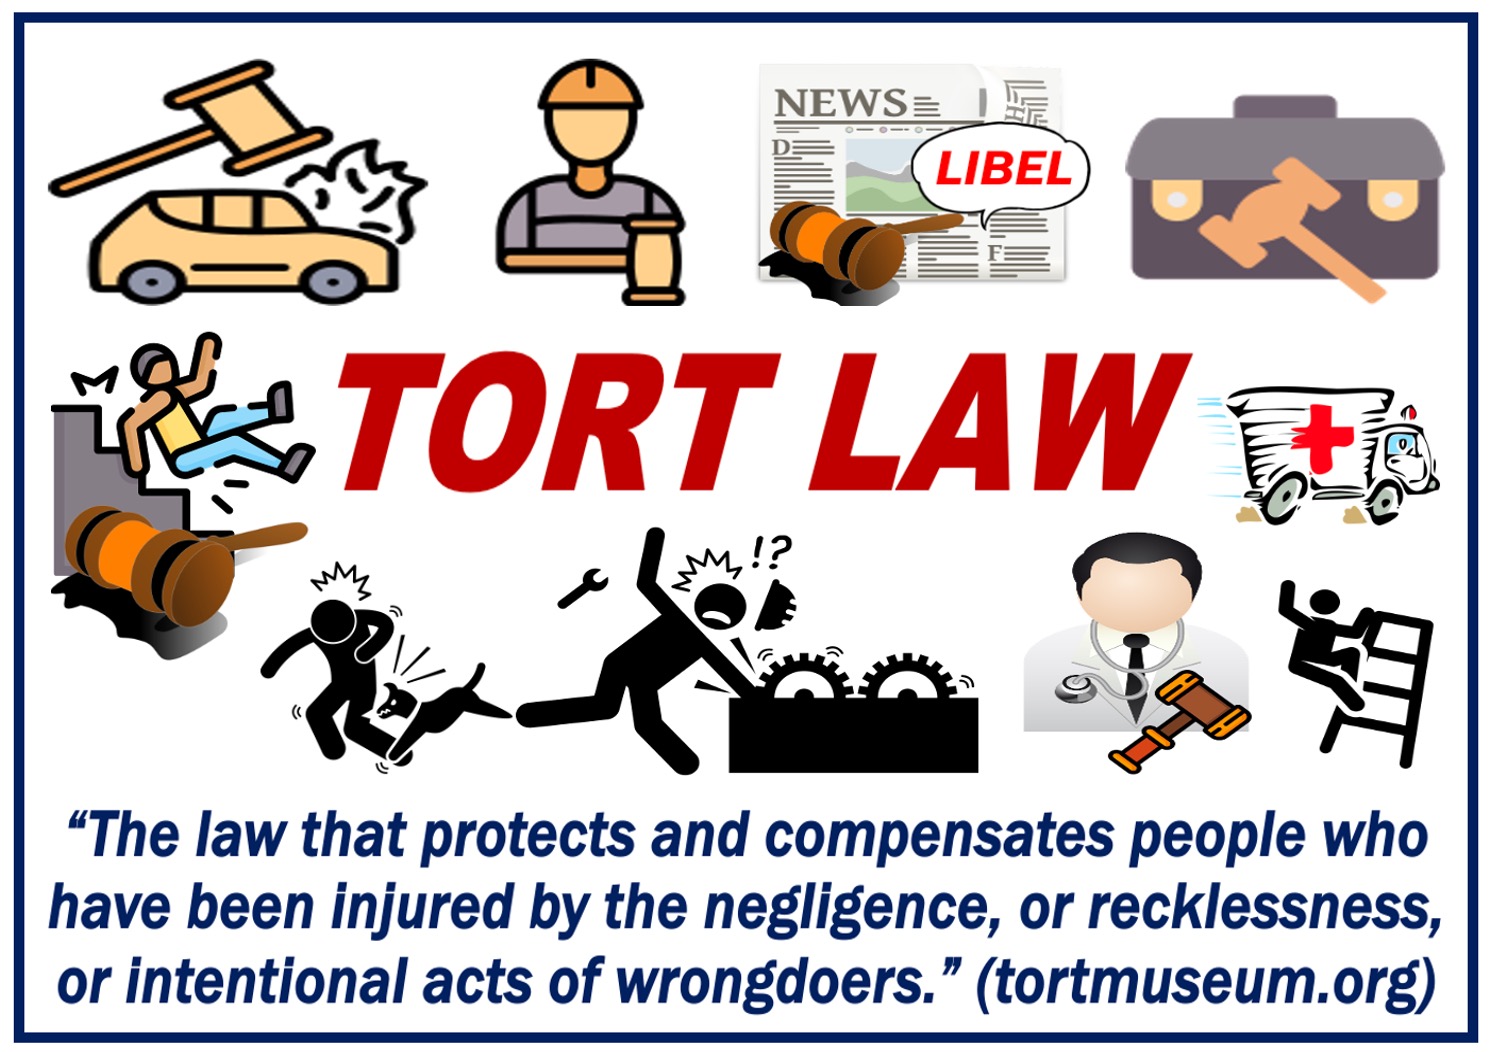 Many images depicting torts and a definition of tort law.